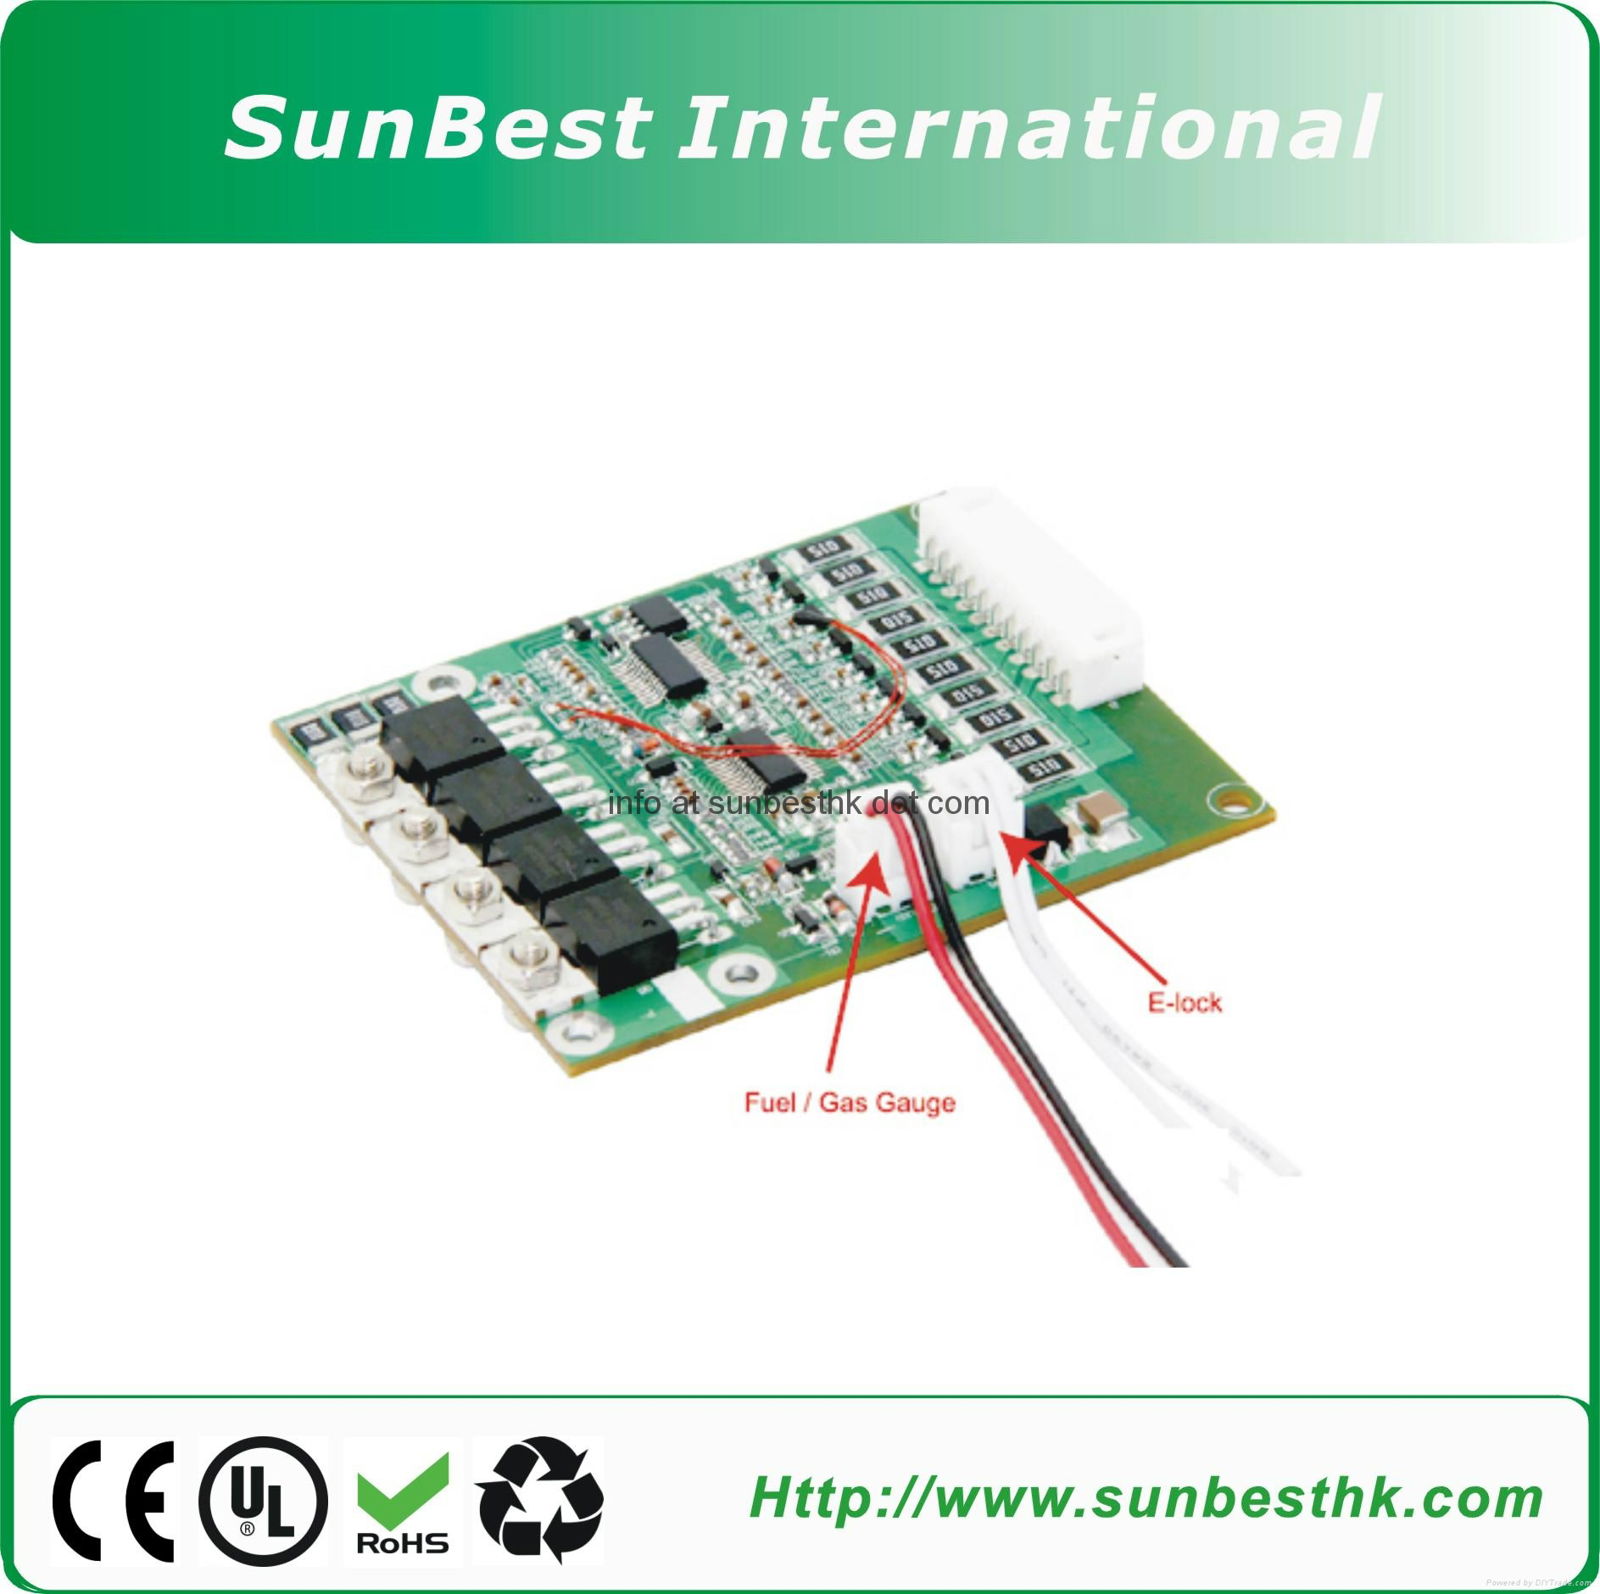 Protection Circuit Board (PCB) for 37V 10S Li-ion and Li-Polymer Battery 3